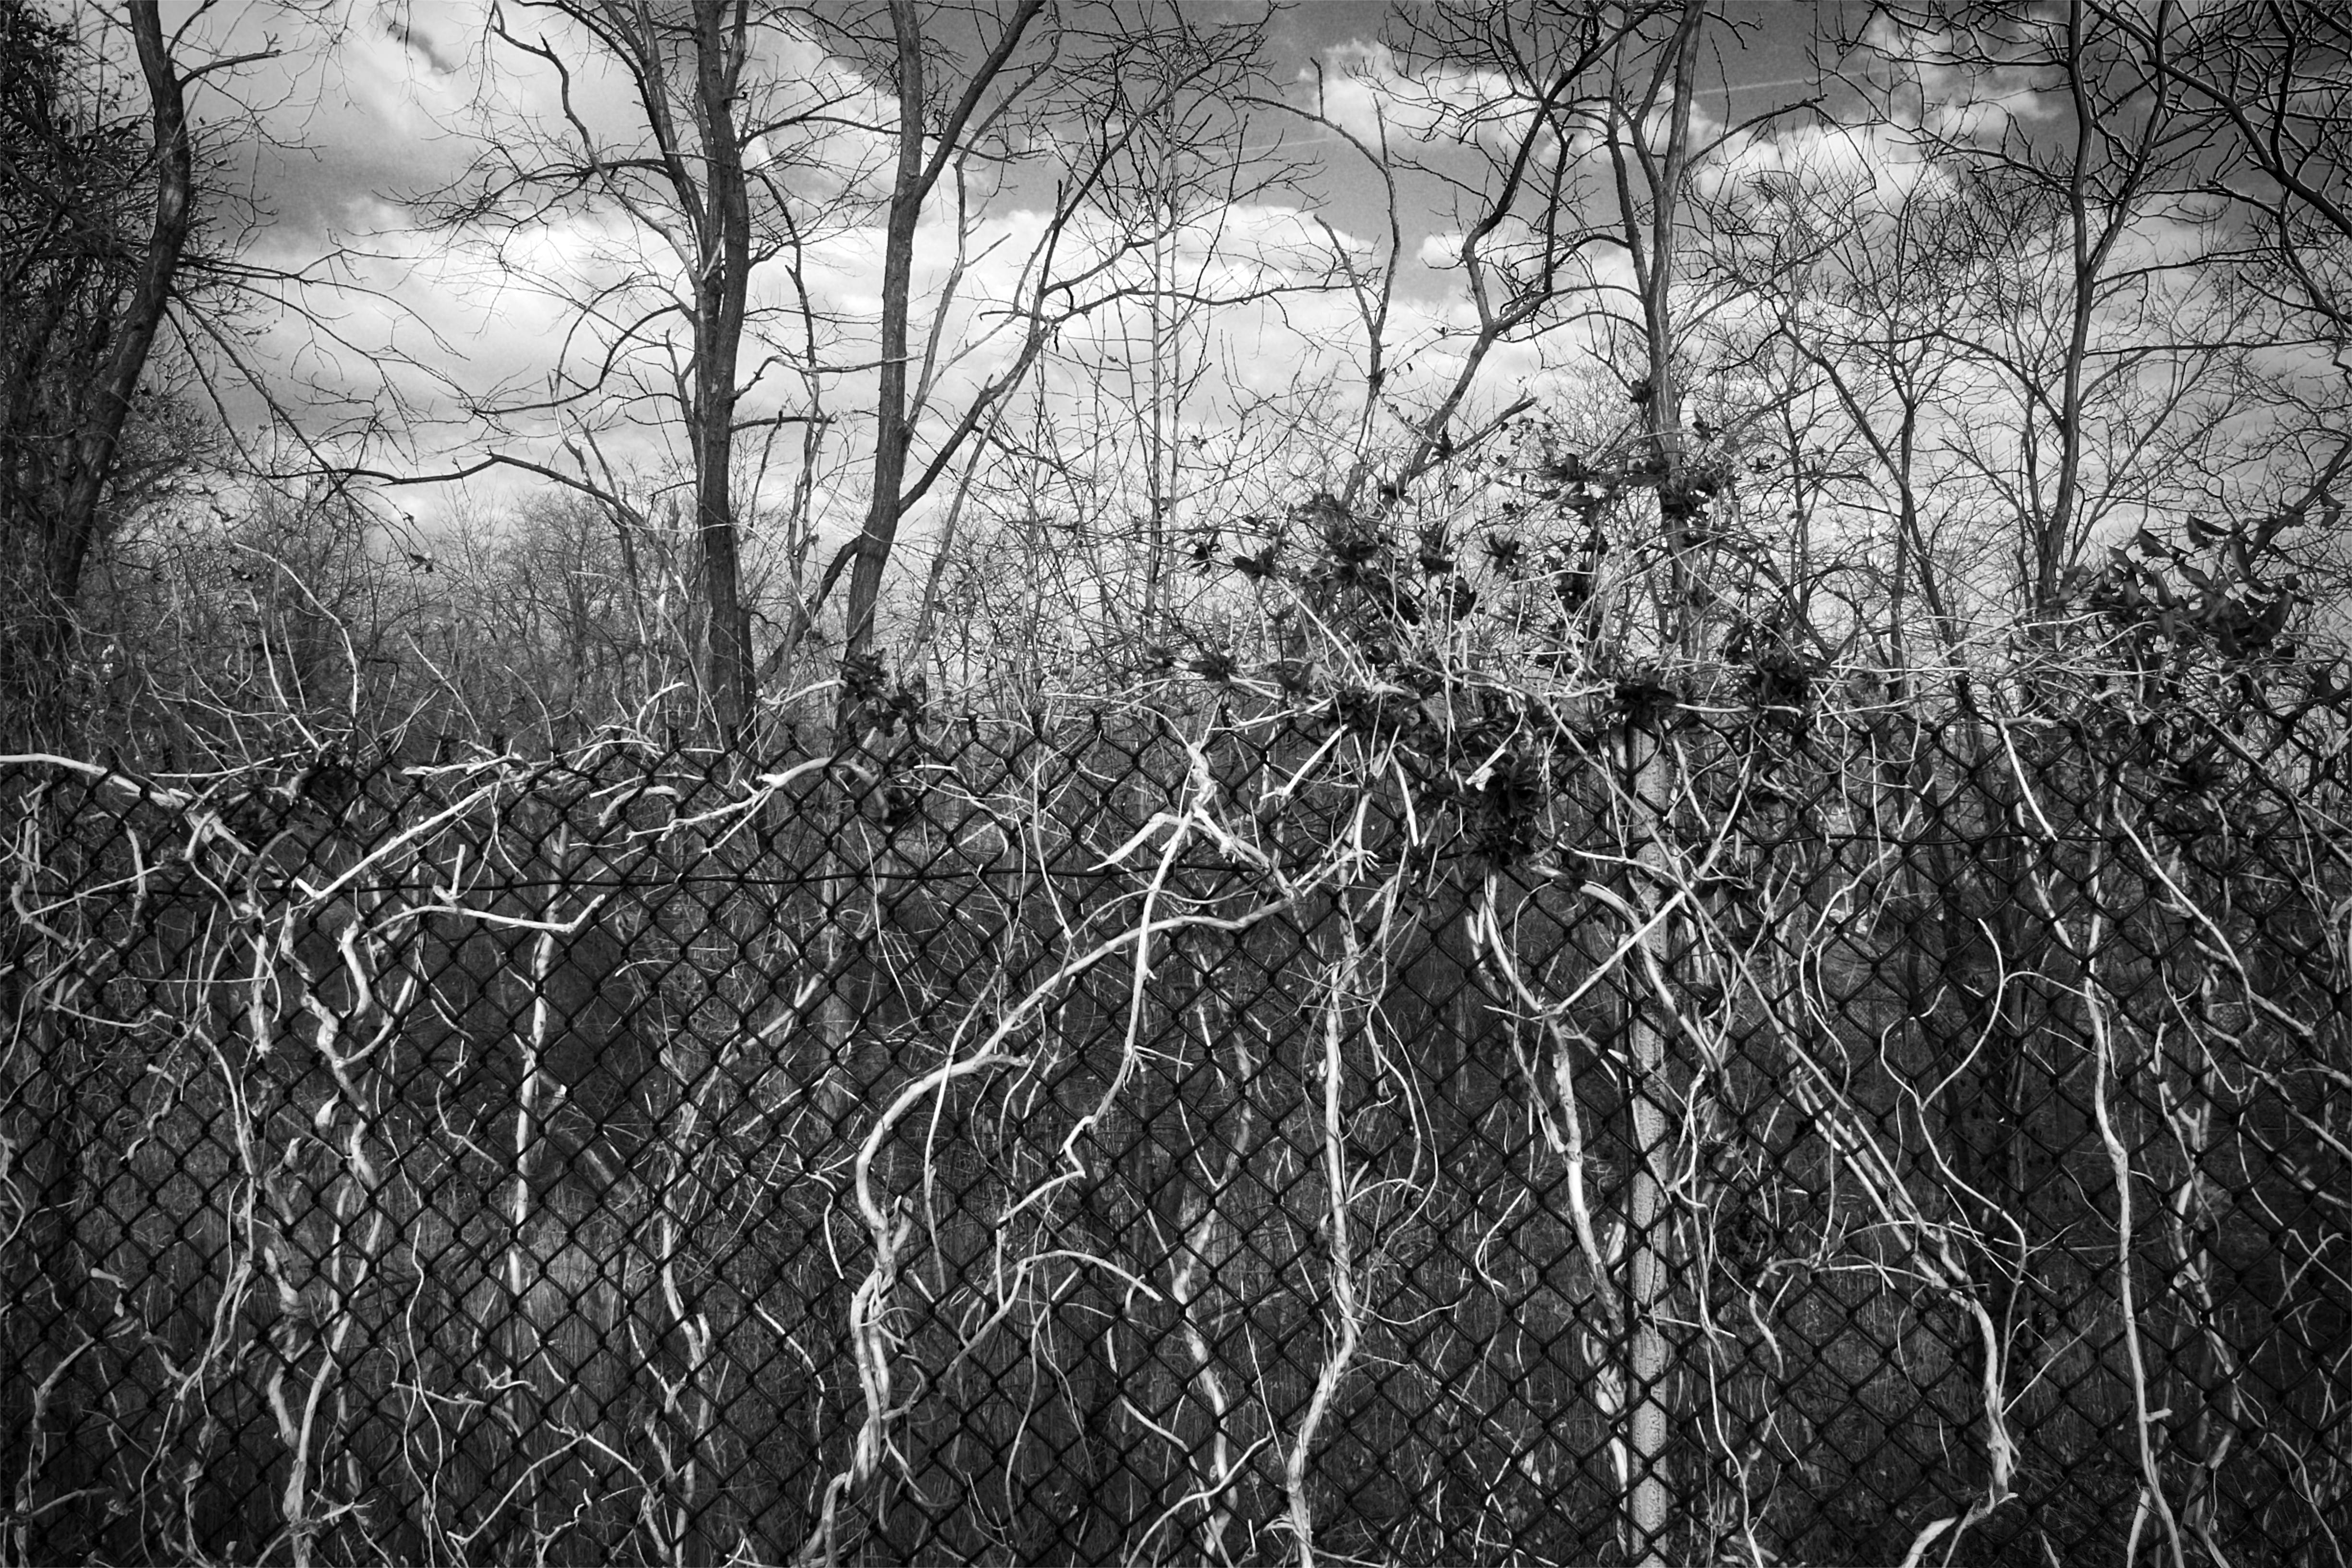 Black and white photo: a semi-abstract pattern of trees, chain-link fence, and vines intertwine against a cloudy sky.